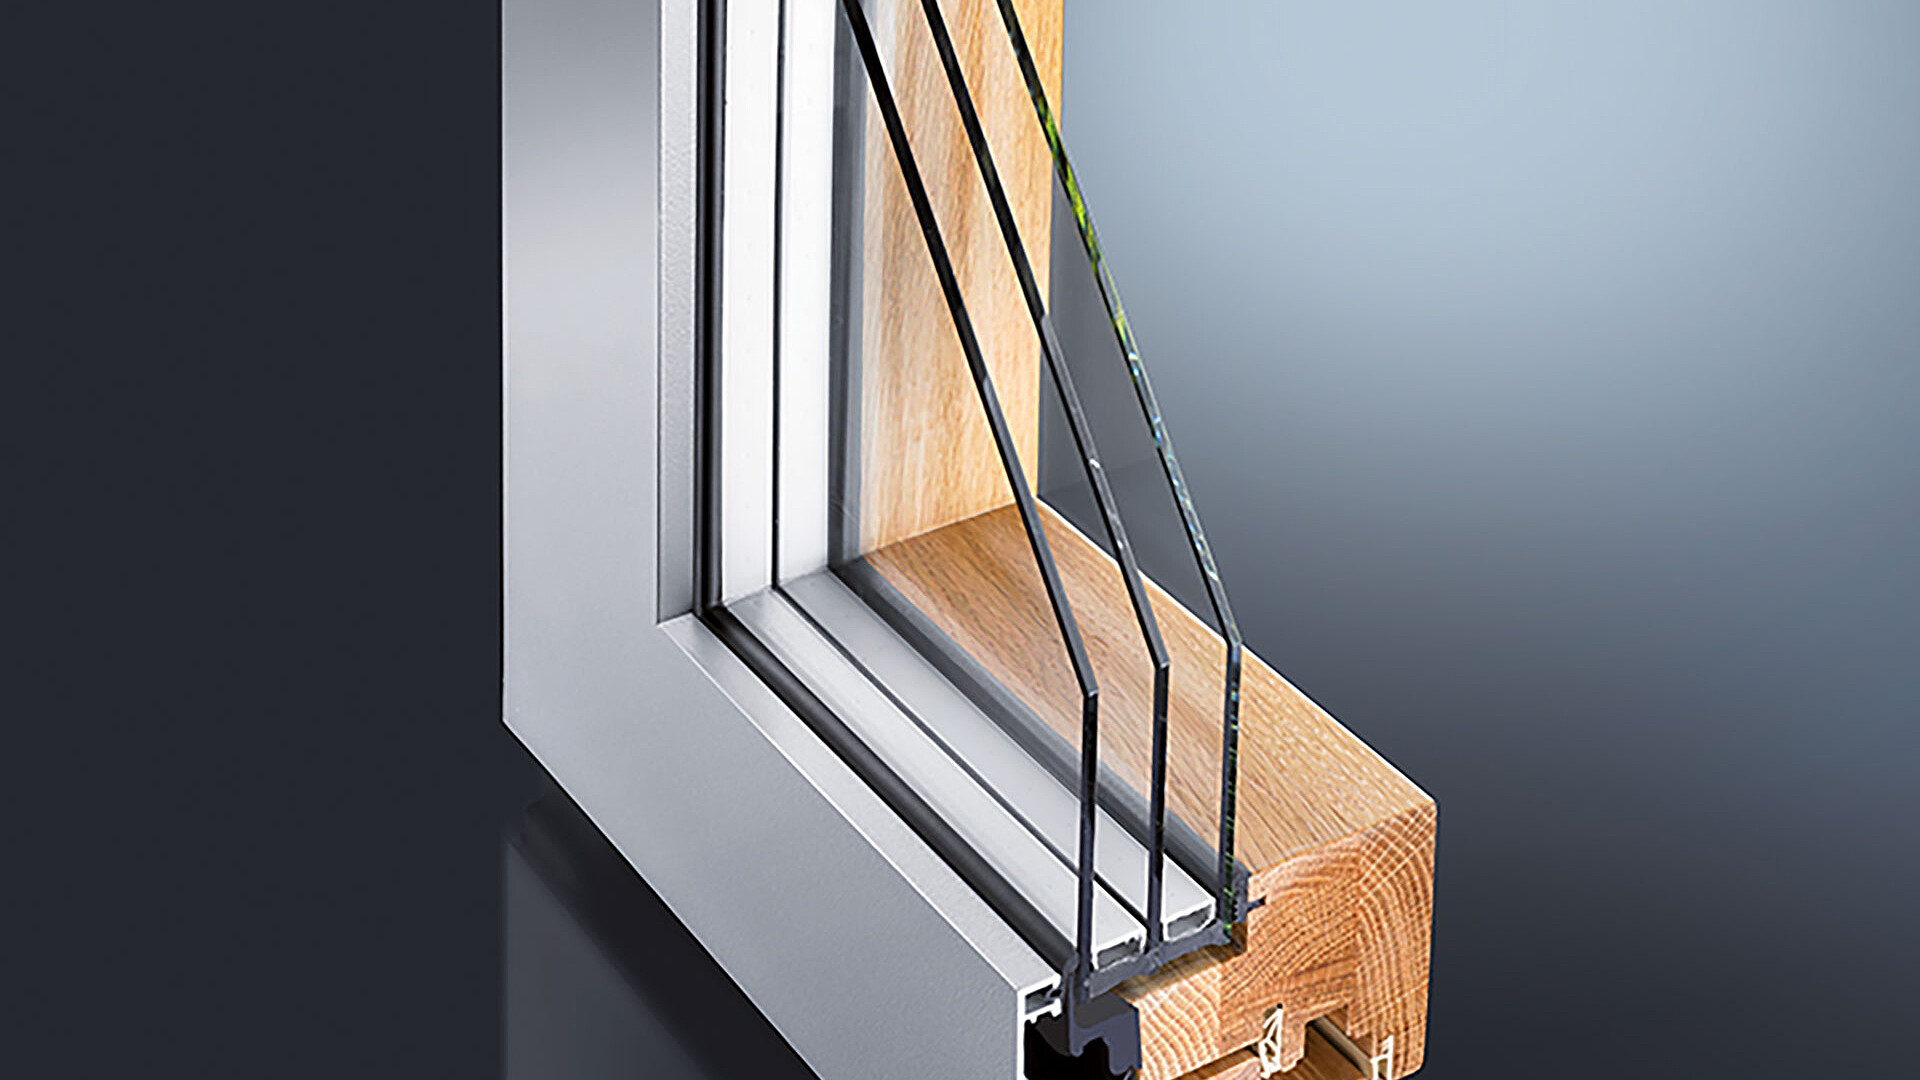 The GUTMANN MIRA contour integral wood-aluminium window system has narrow frame faces with concealed sashes. The visible edge has small radii.